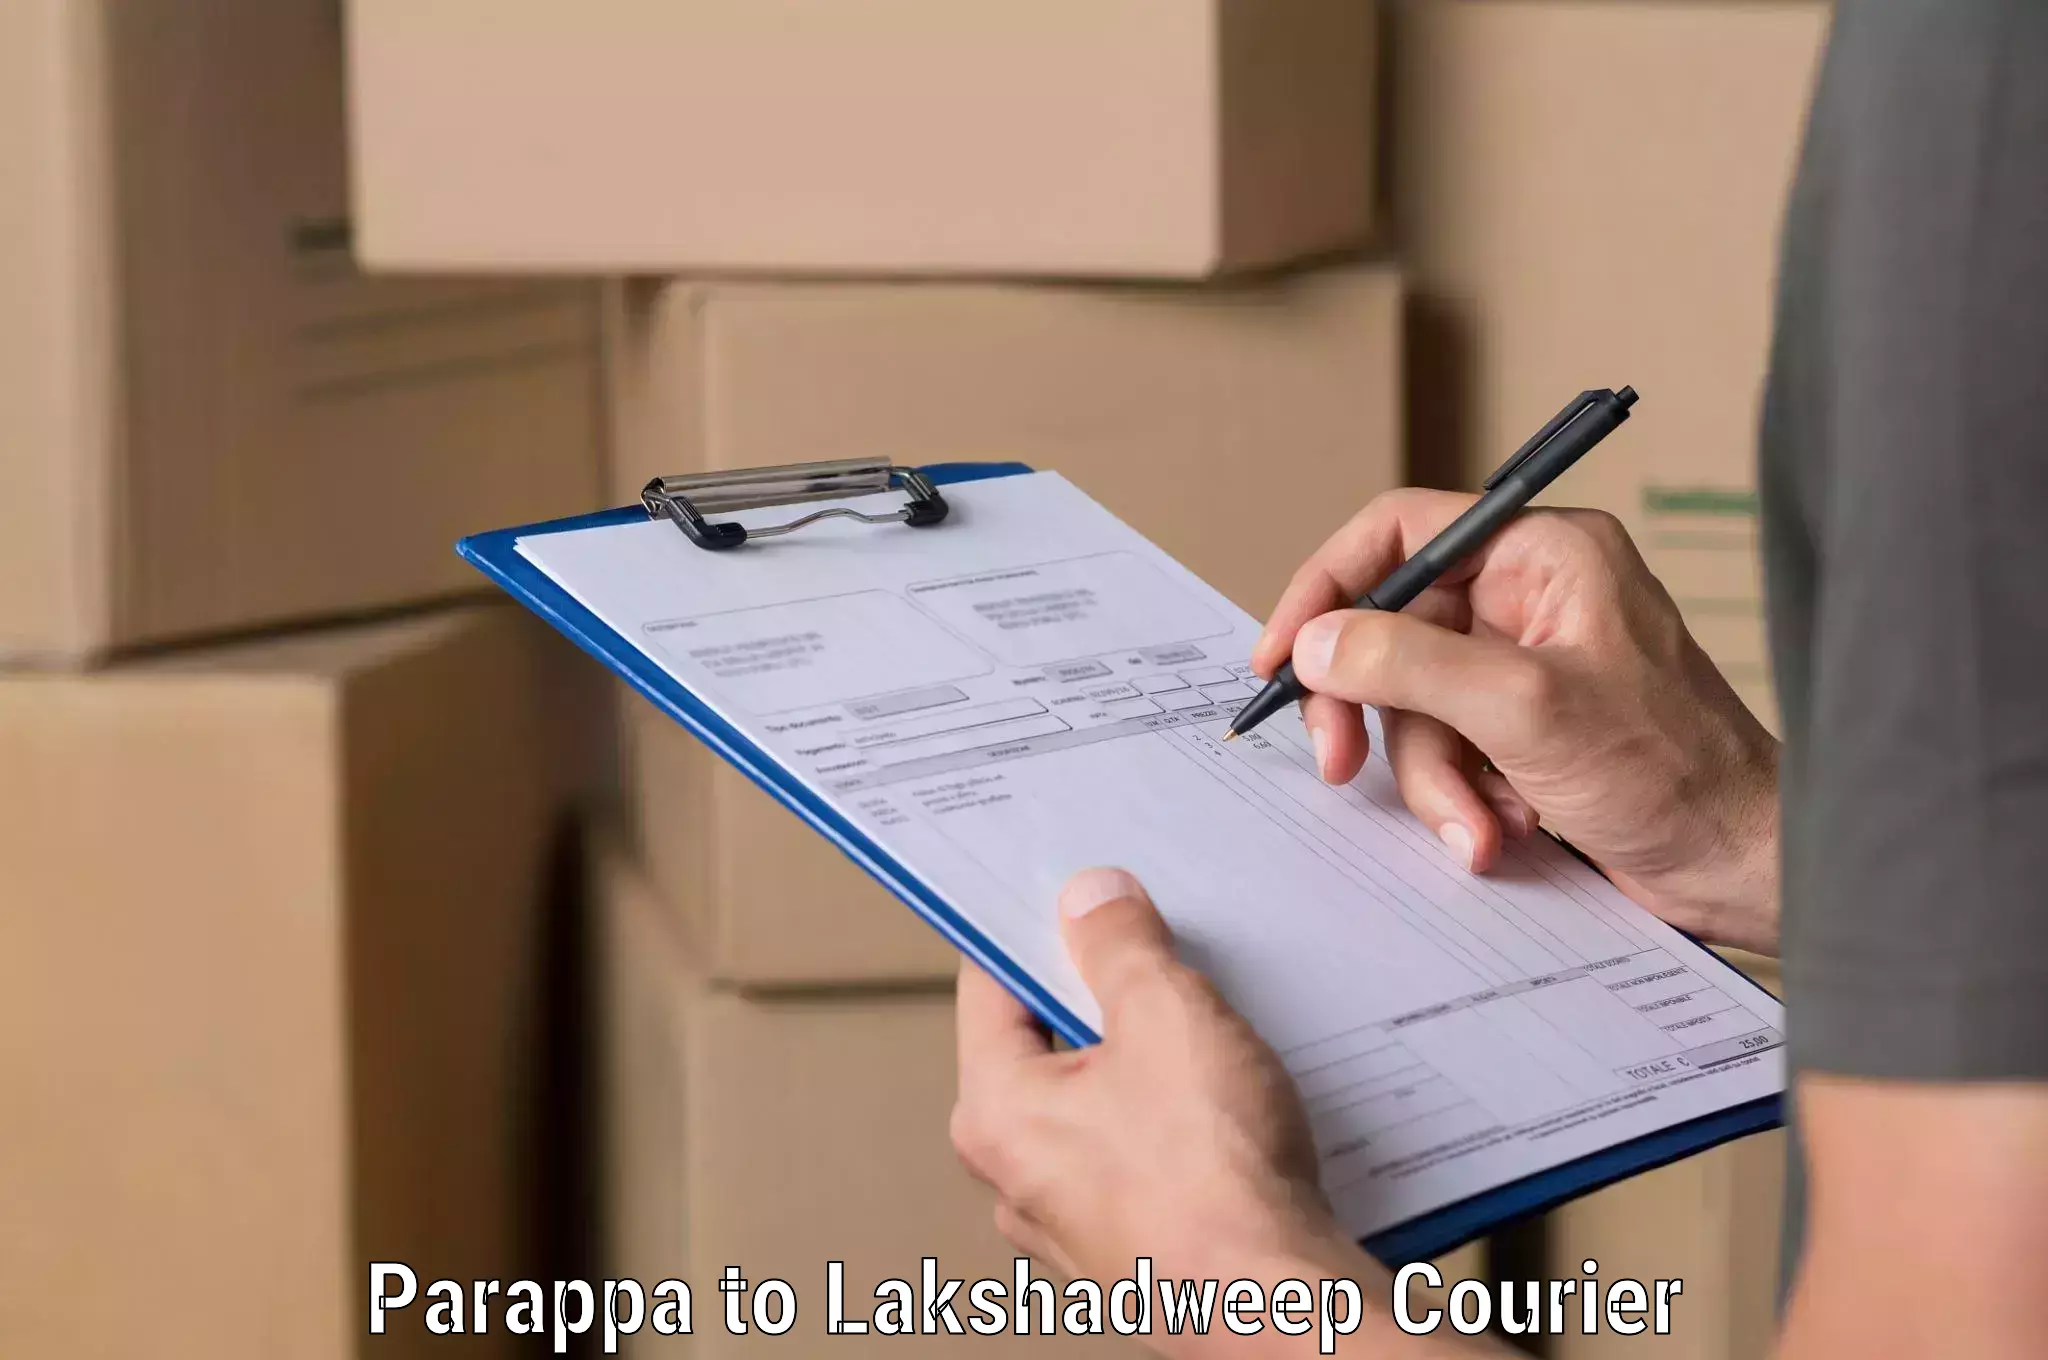 Global freight services Parappa to Lakshadweep